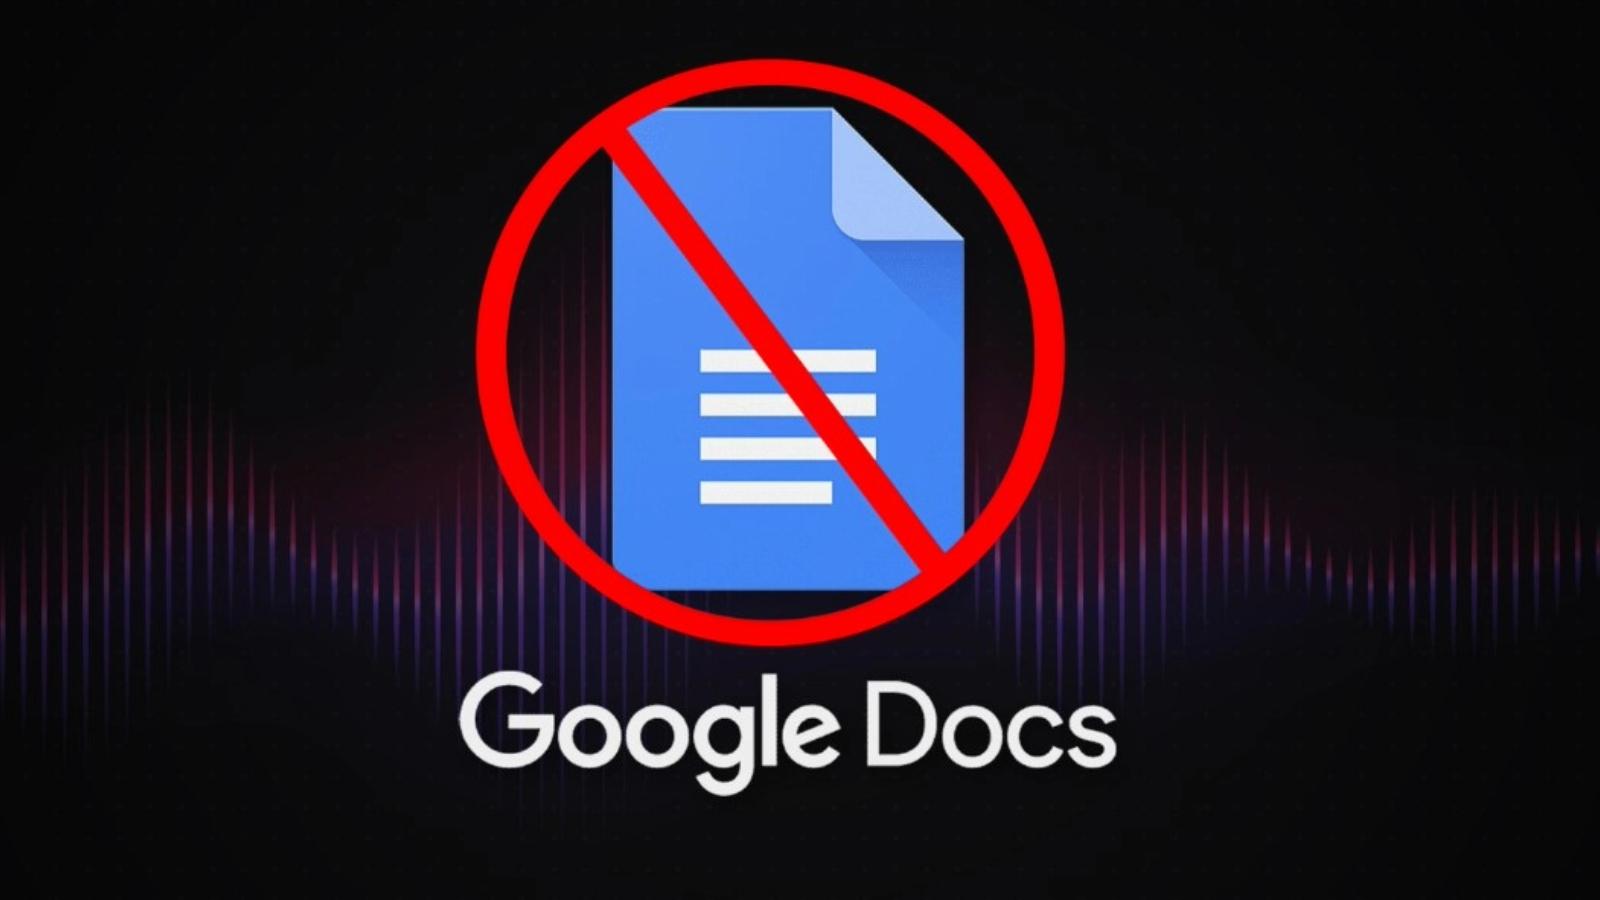 Image showing Google Docs logo with ban logo on it against a purple background